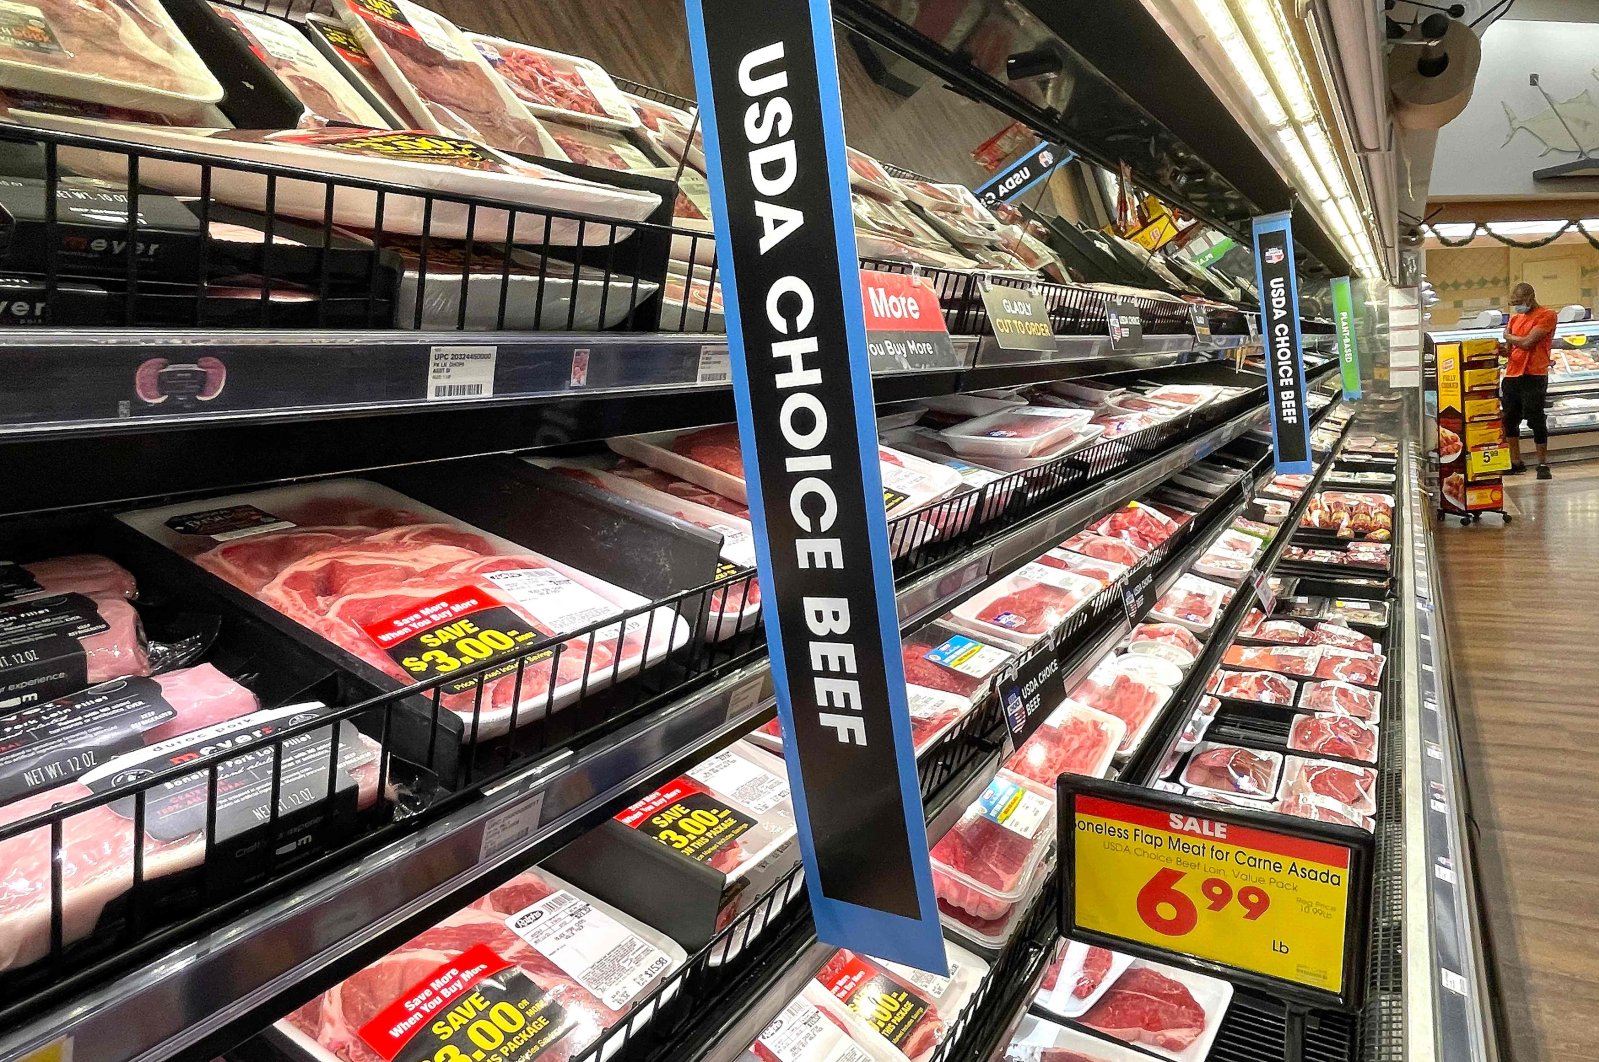 USDA Choice beef is displayed for sale in a grocery store in Los Angeles, California, U.S., Nov. 11, 2021. (AFP Photo)